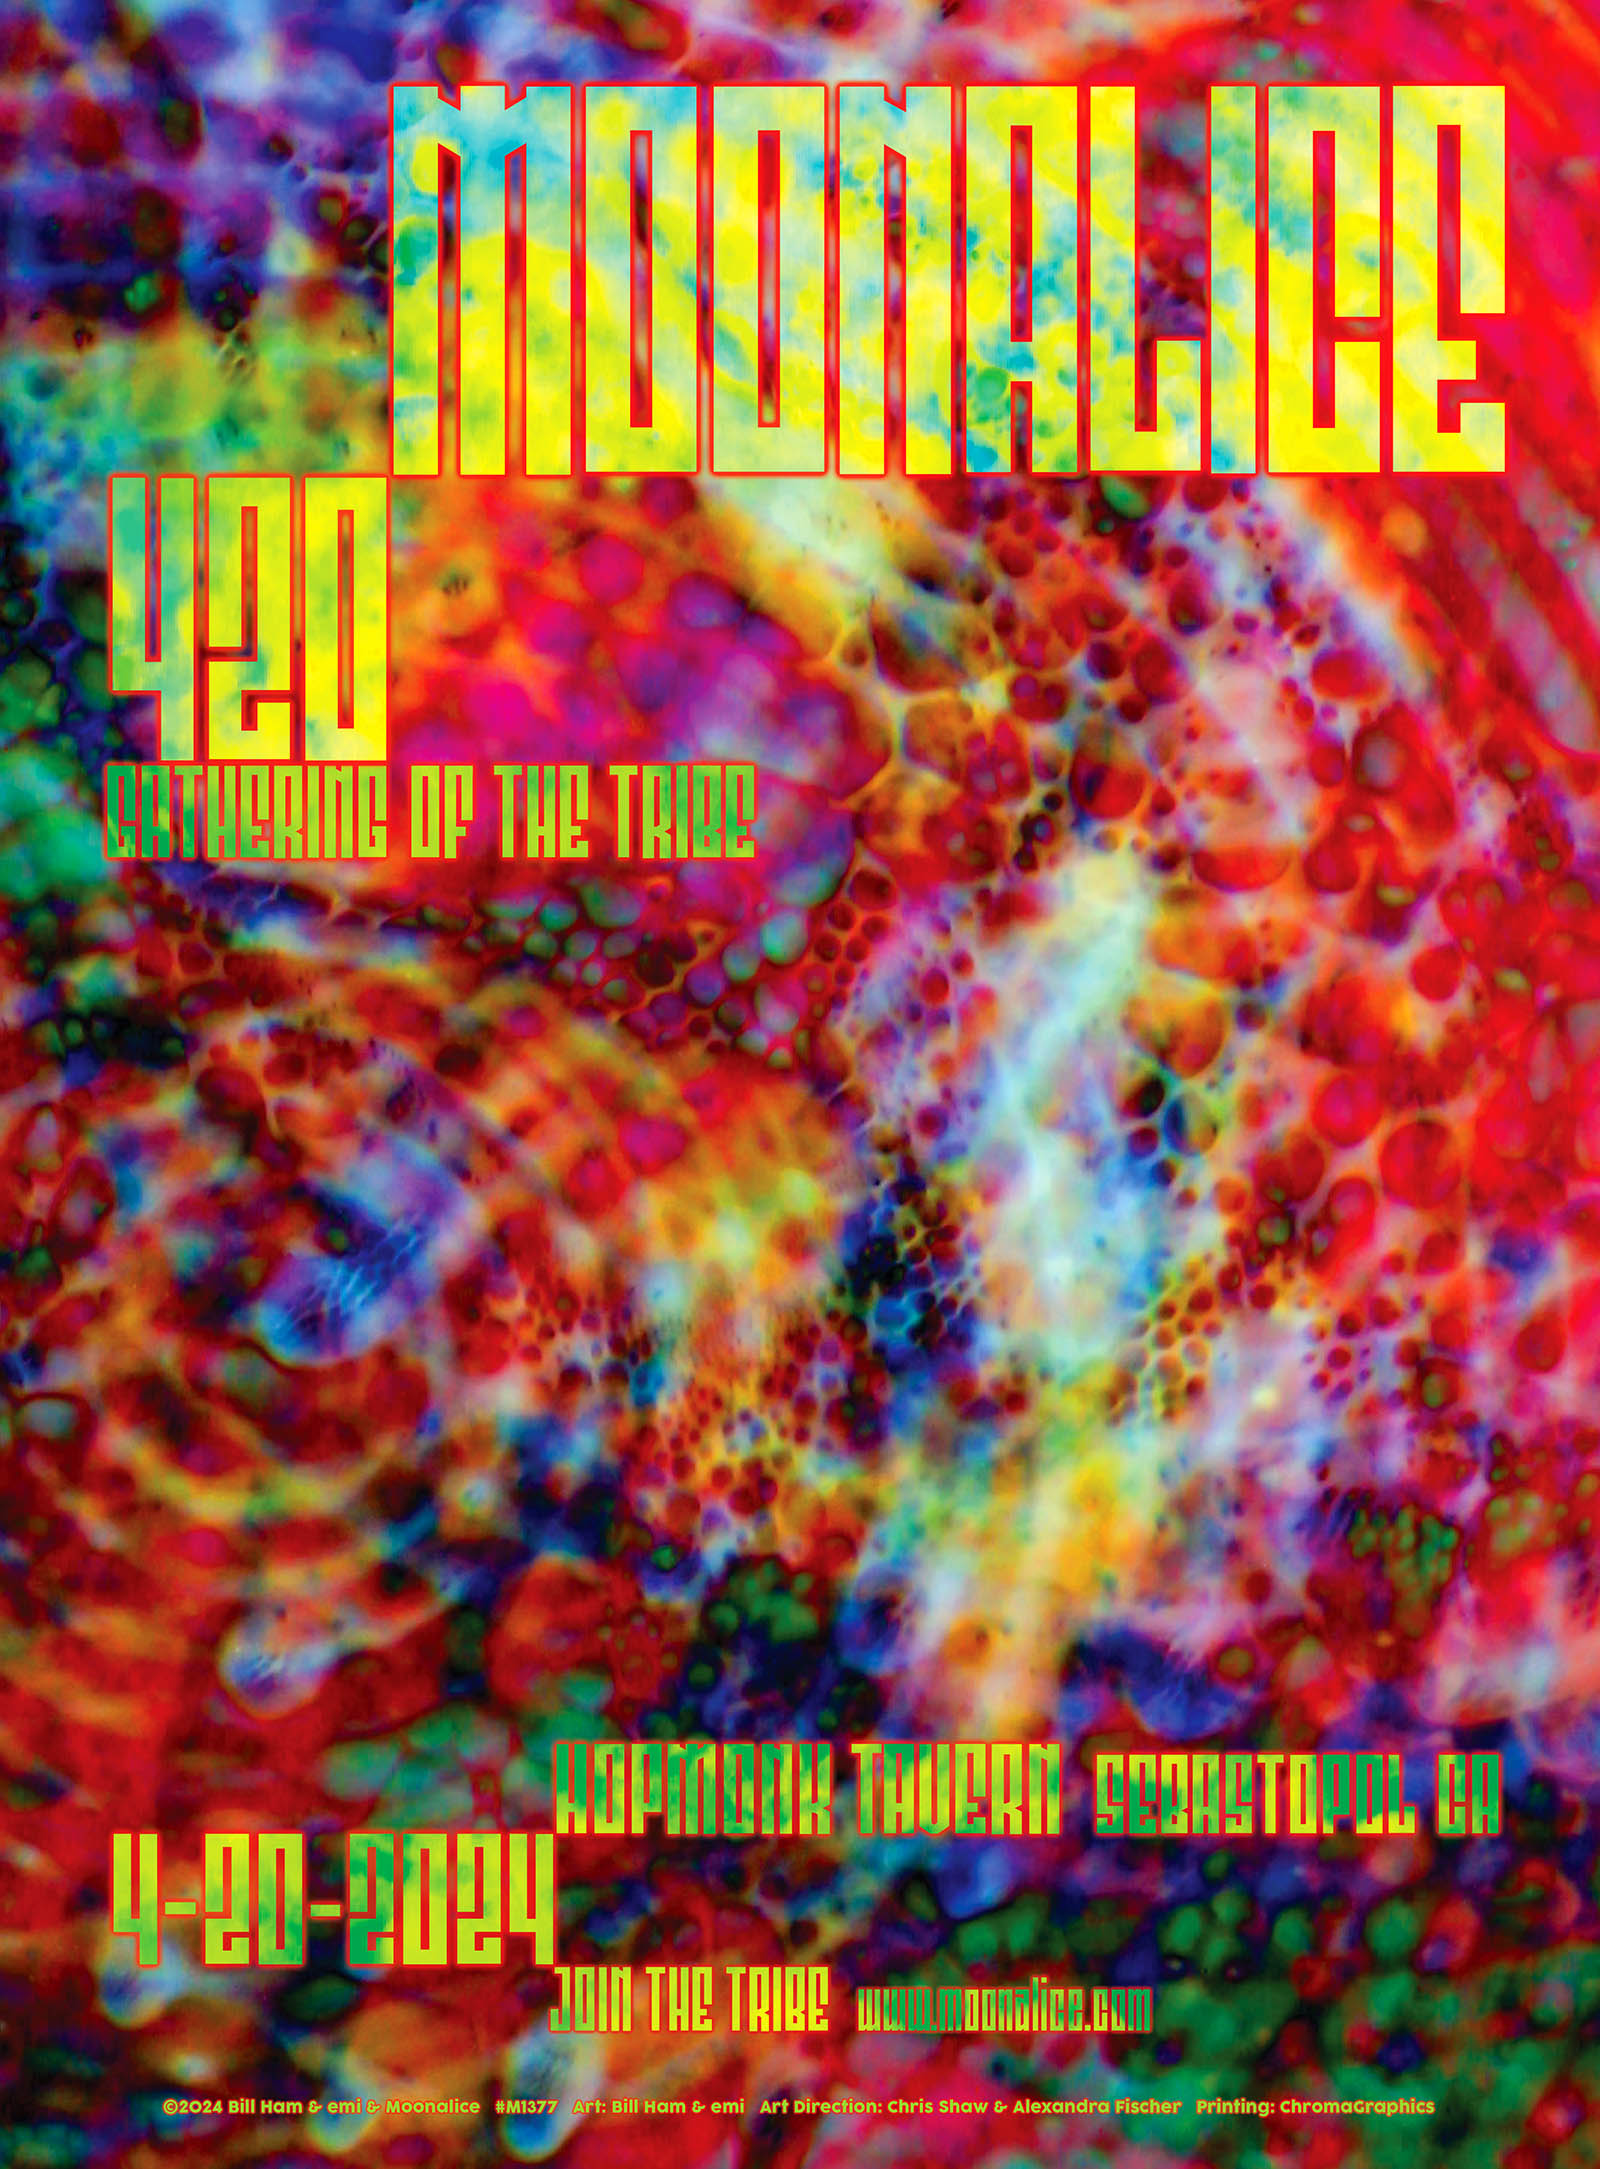 2024 Moonalice 420 Gathering of the Tribe poster, 12.75″ x 17.25″ limited edition offset lithograph printed, Light Painting by Bill Ham, photo and design by emi